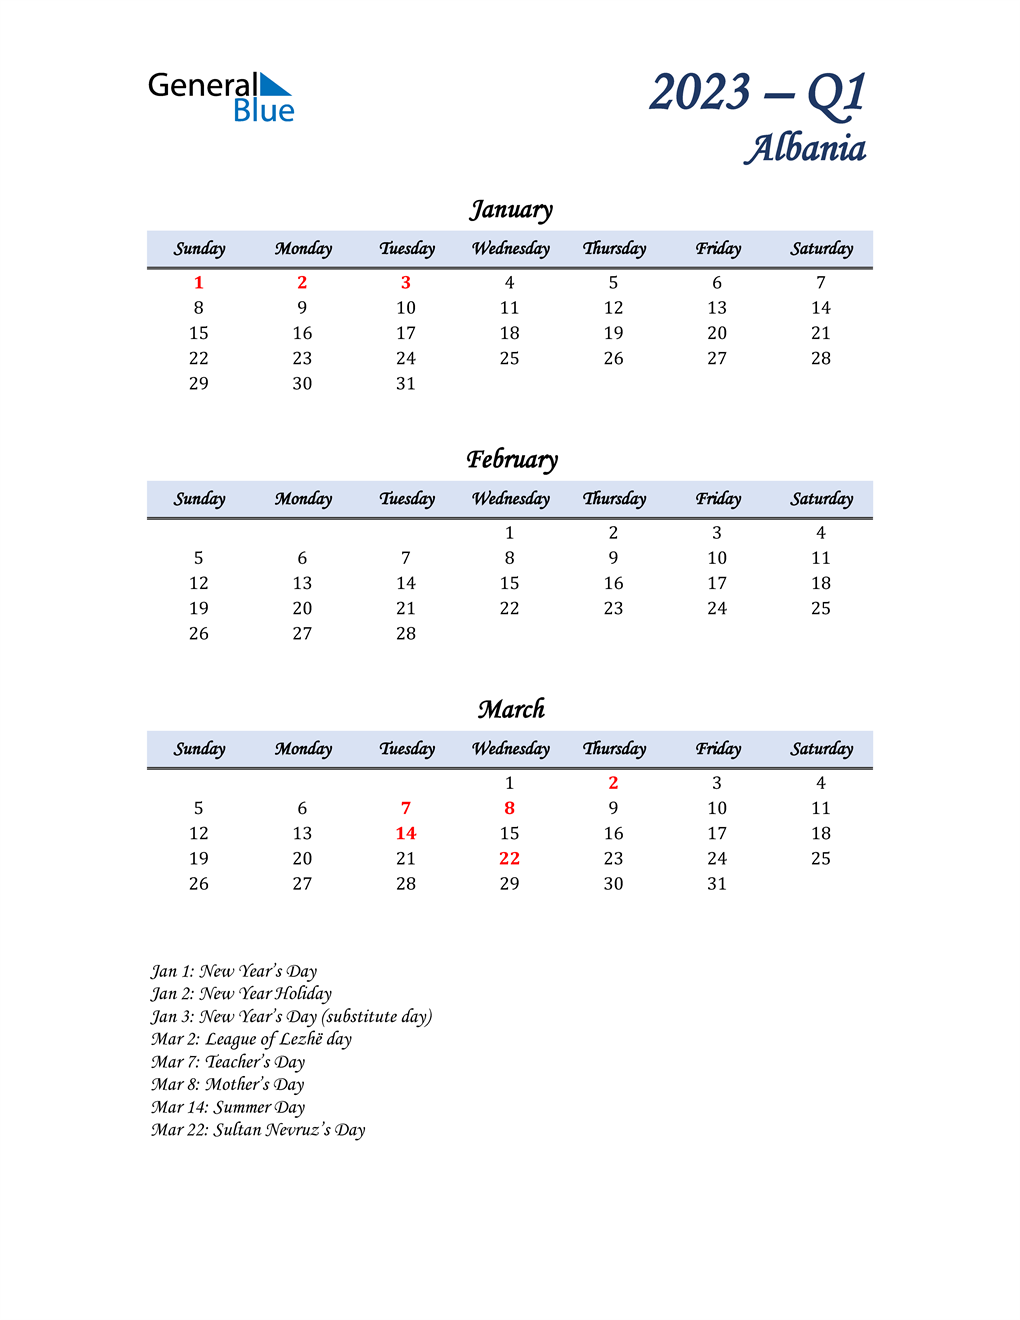  January, February, and March Calendar for Albania